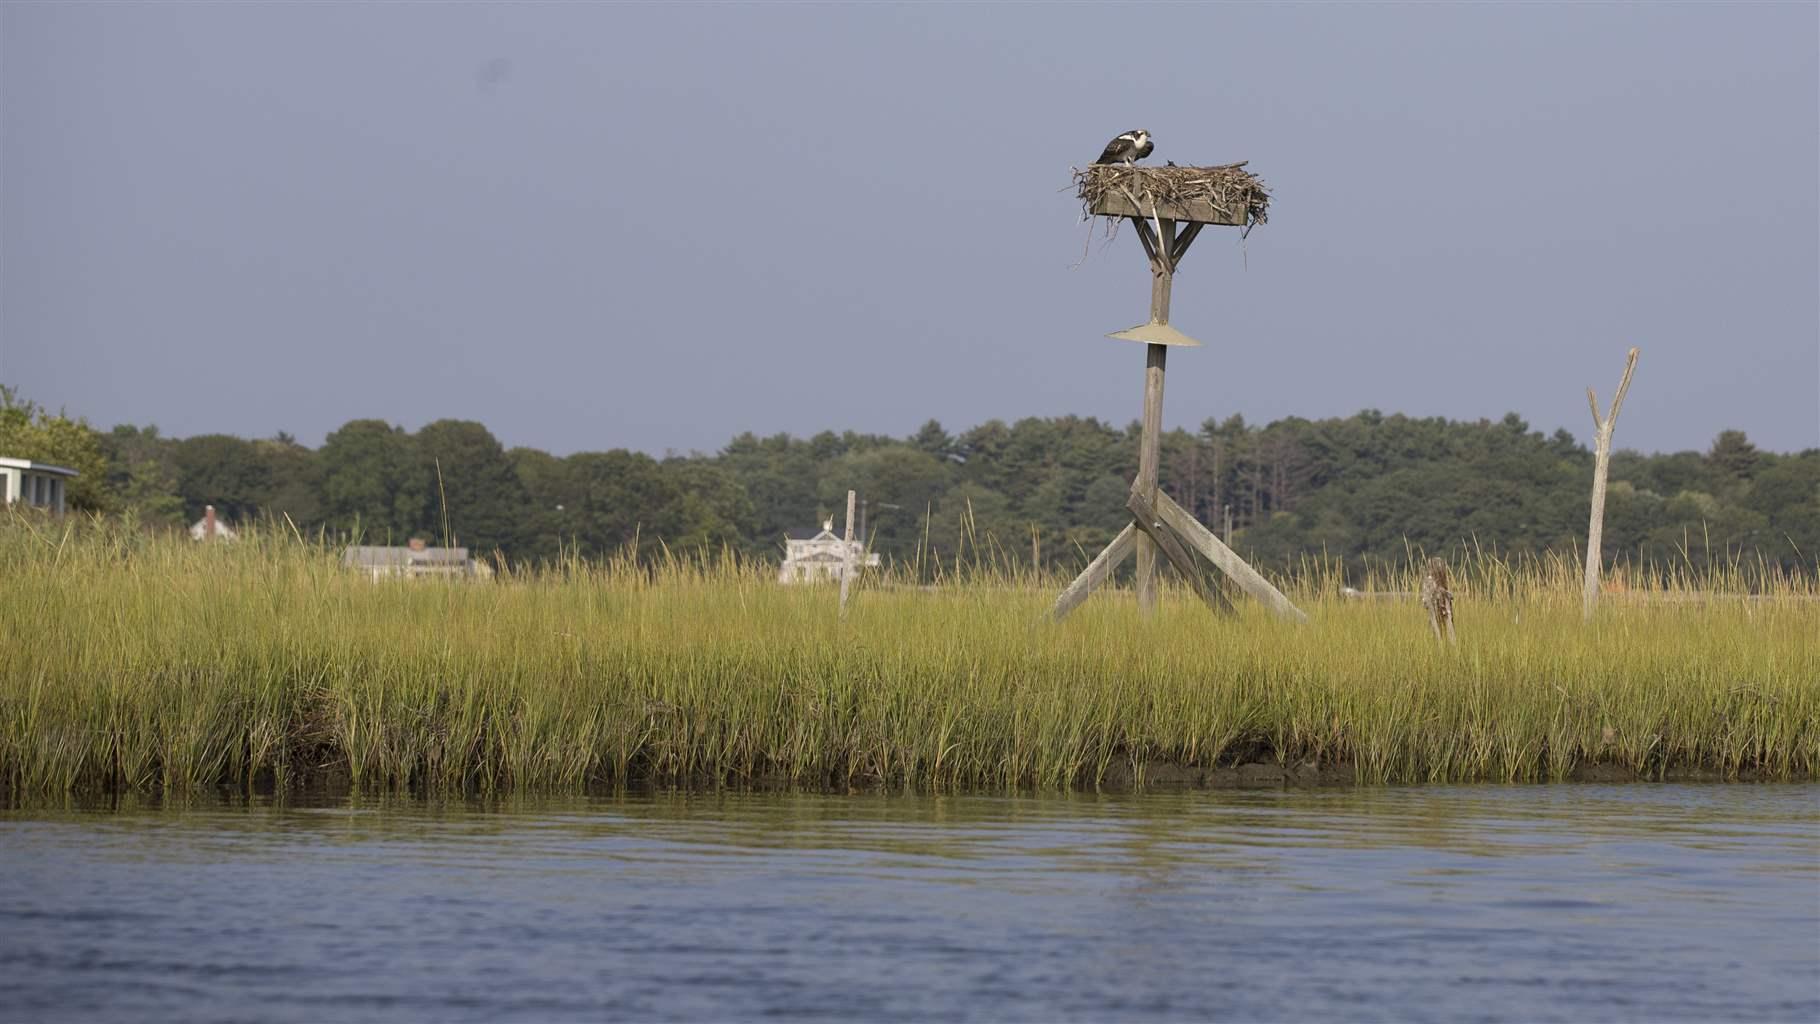 An osprey perches on the edge of it's nest looking over the seagrass.